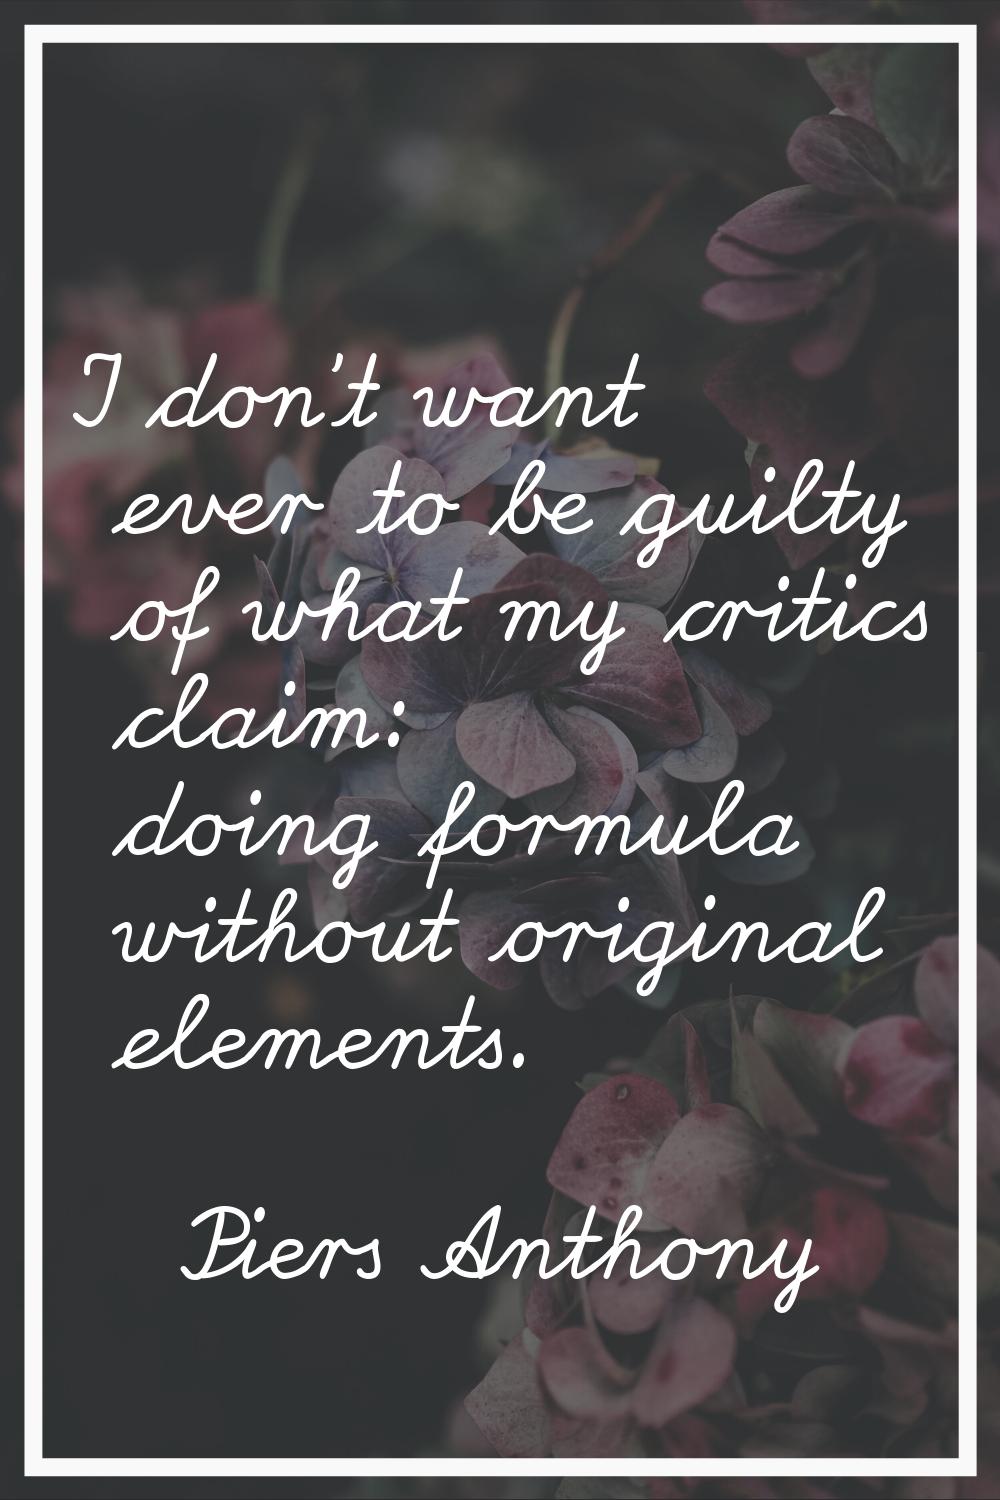 I don't want ever to be guilty of what my critics claim: doing formula without original elements.